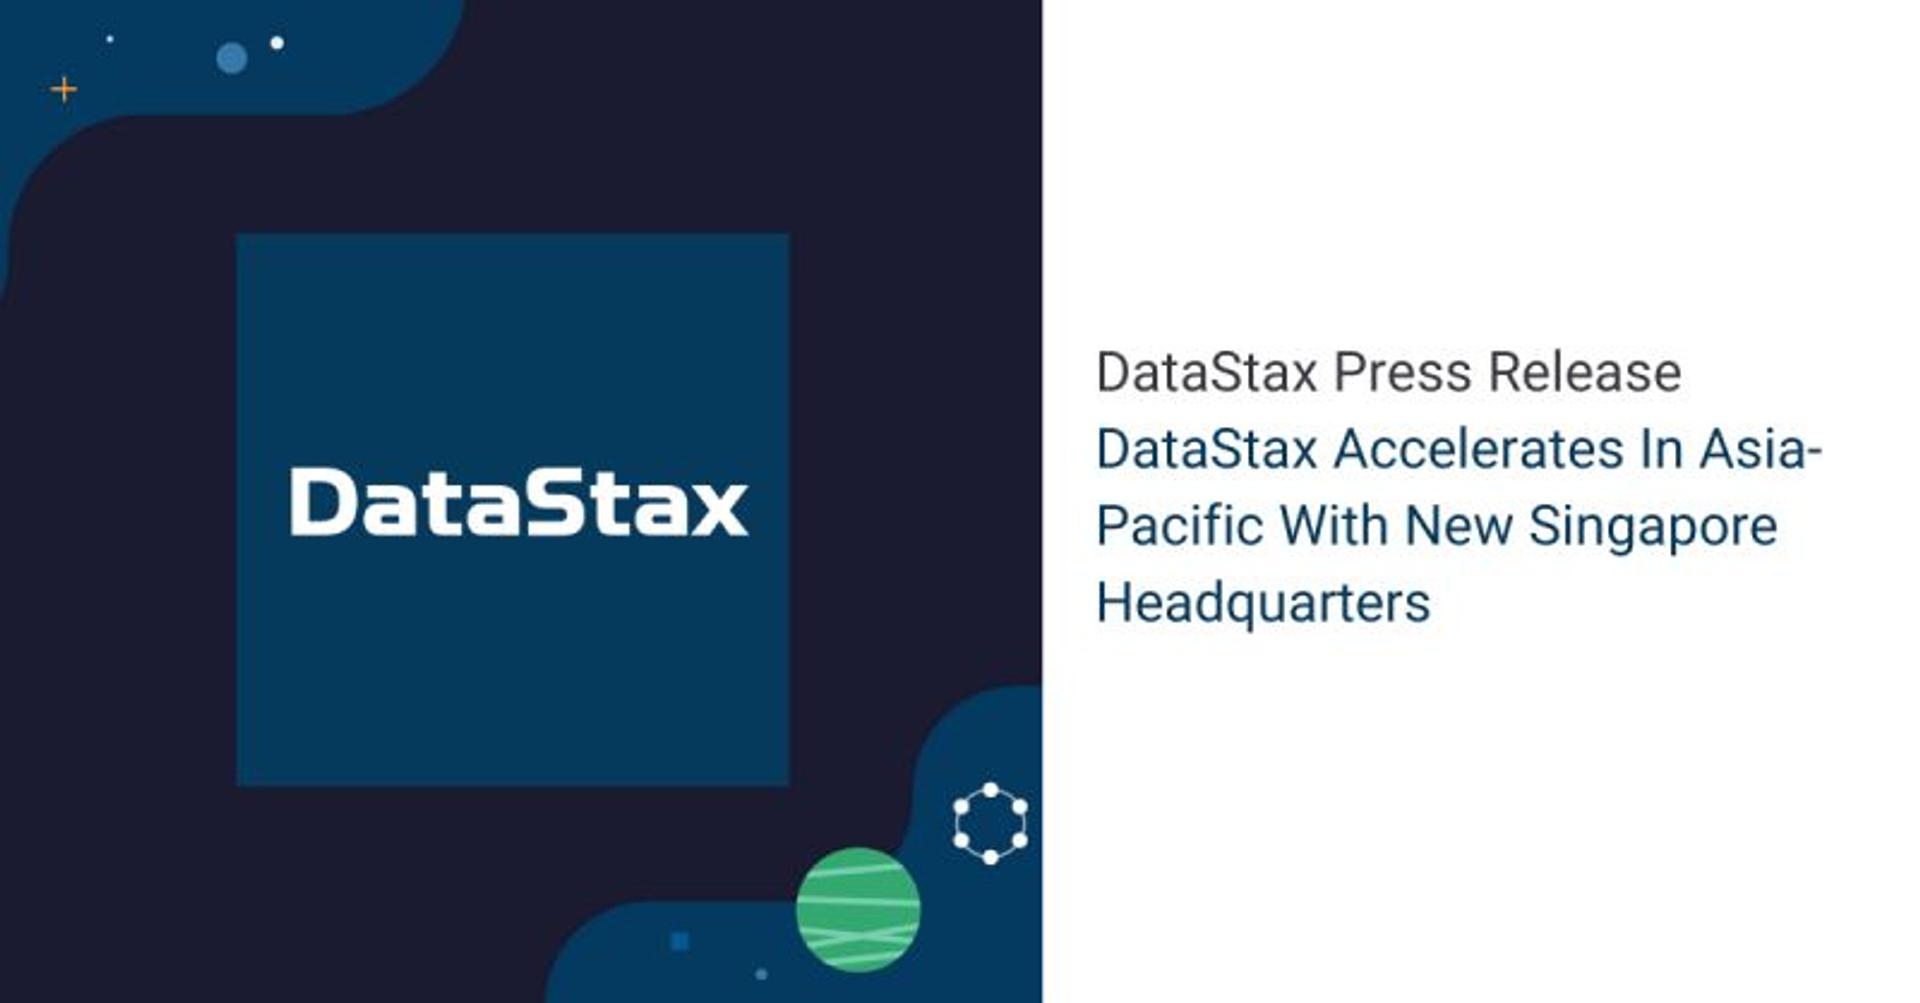 DataStax Accelerates In Asia-Pacific With New Singapore Headquarters 